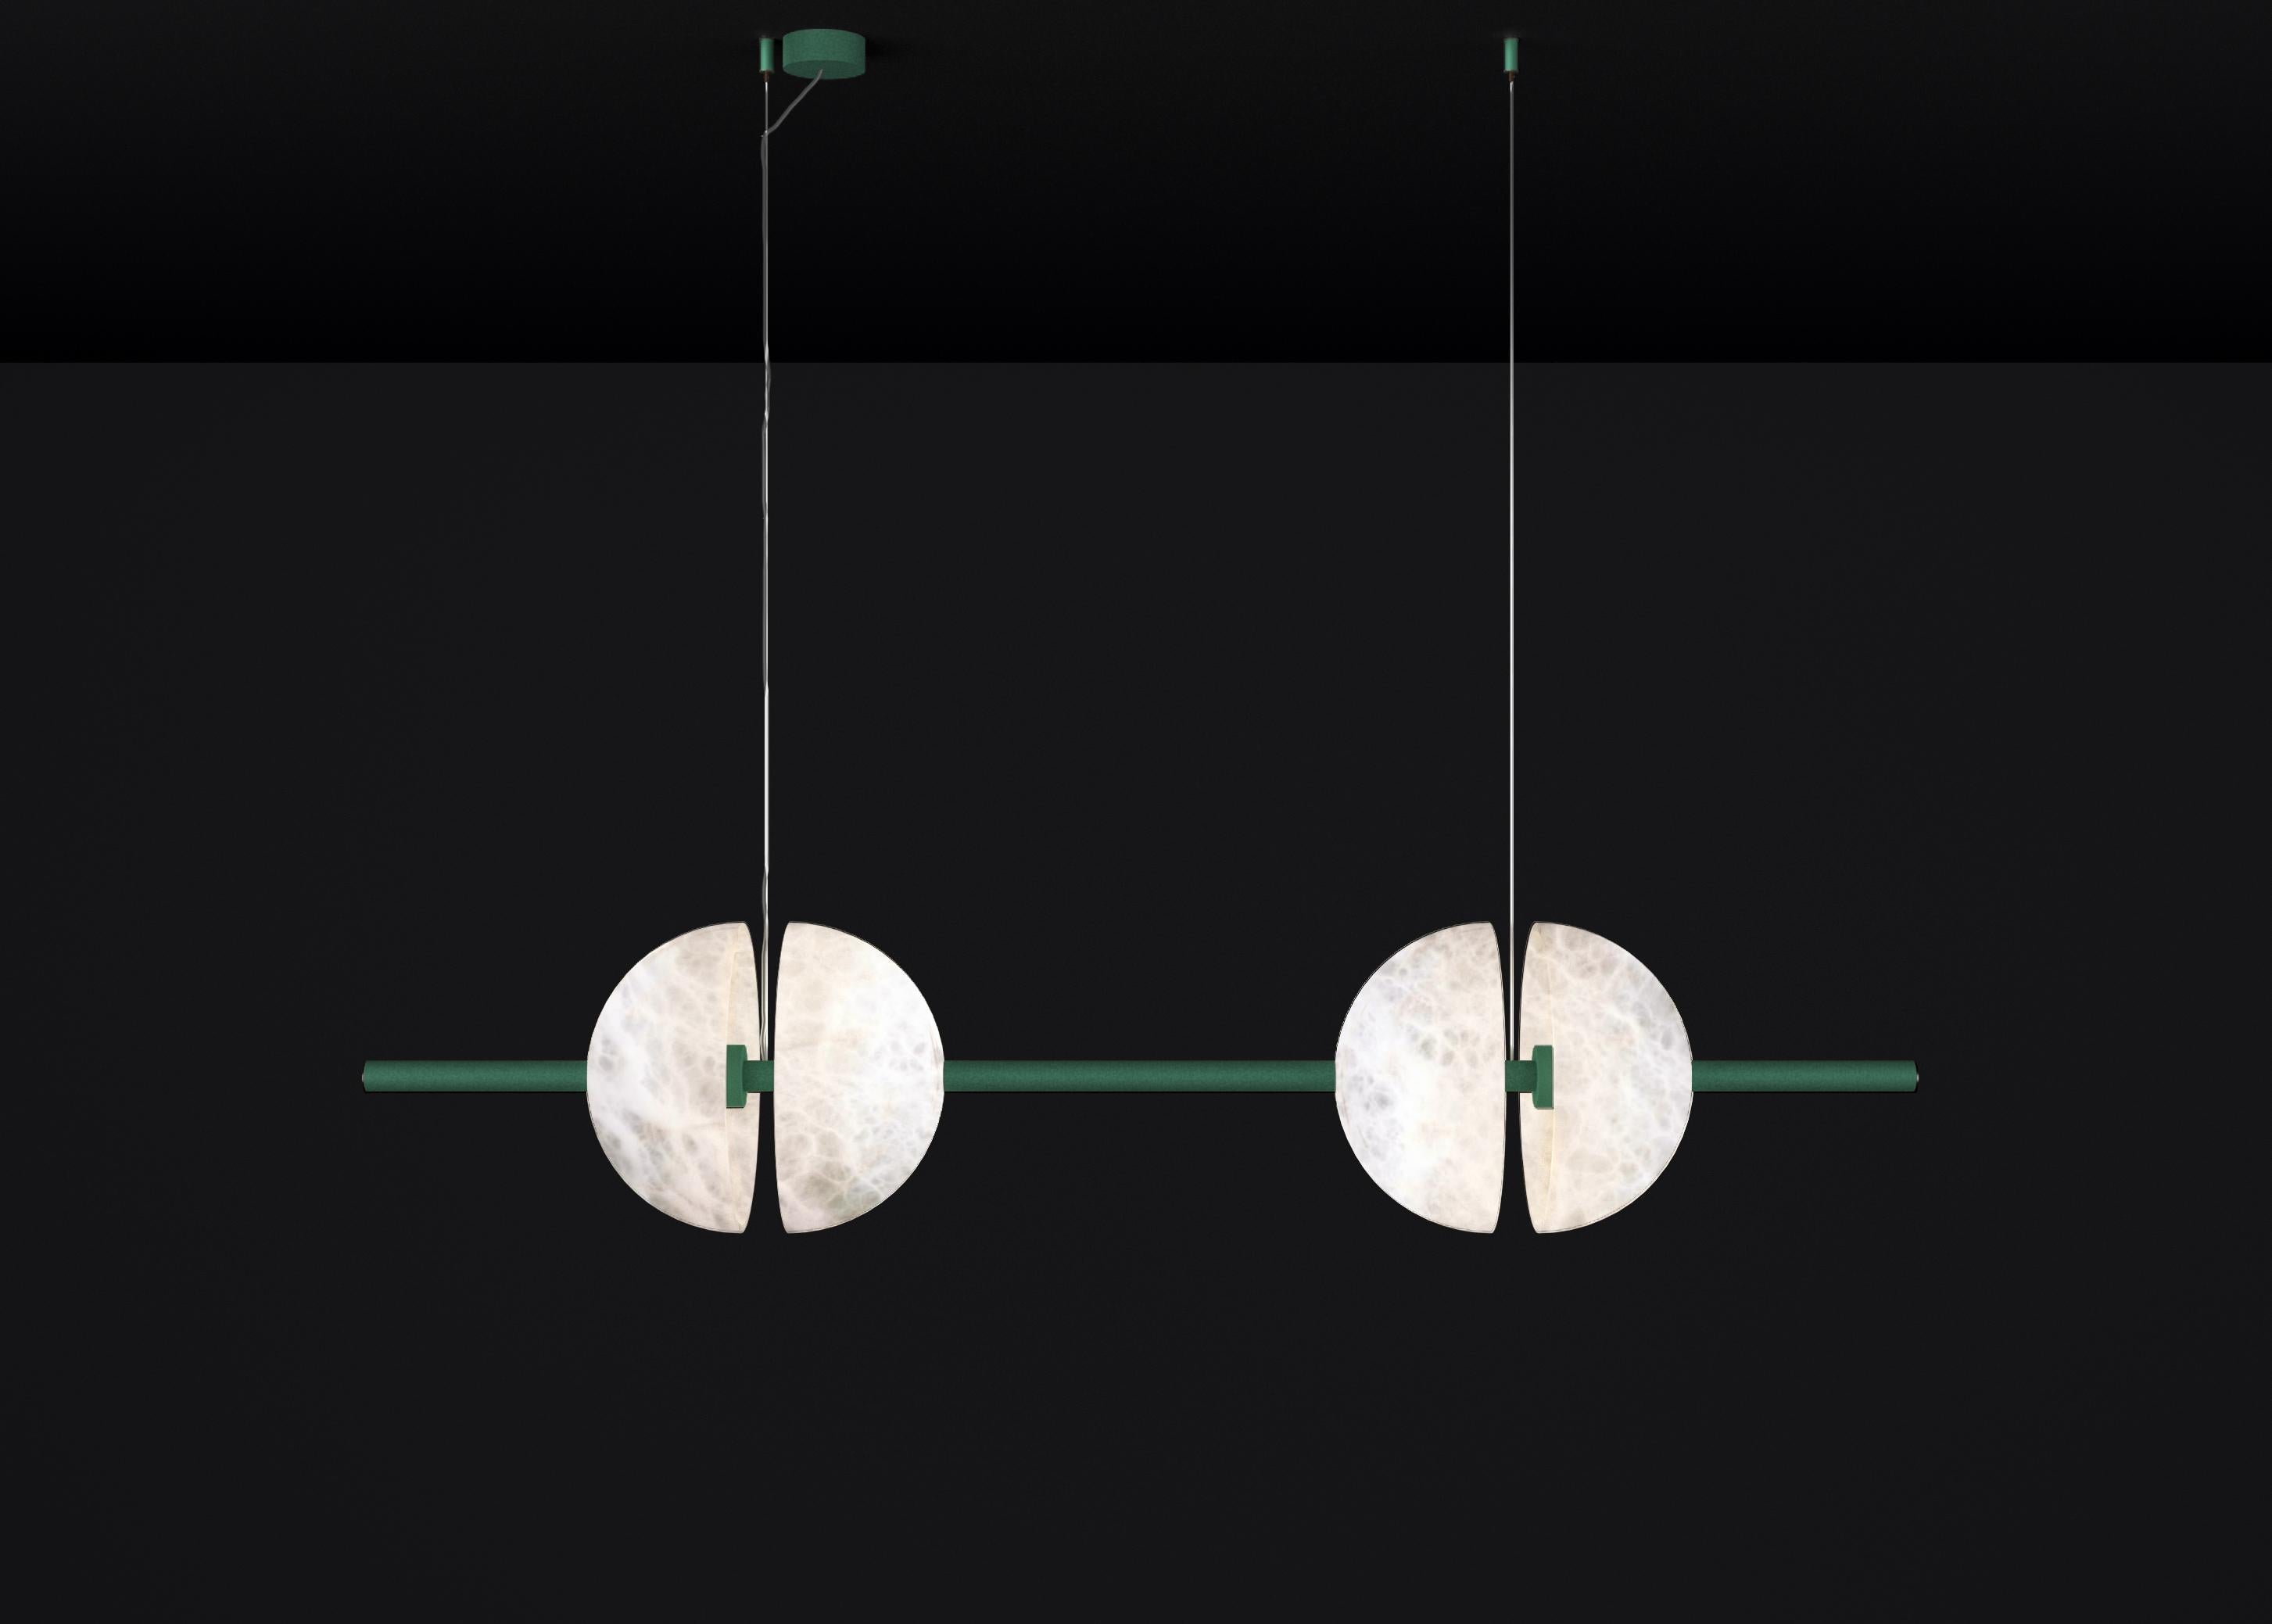 Ermes Freedom Green Metal And Alabaster Pendant Light 1 by Alabastro Italiano
Dimensions: D 30 x W 150 x H 300 cm.
Materials: White alabaster and freedom green metal.

Available in different finishes: Shiny Silver, Bronze, Brushed Brass, Ruggine of